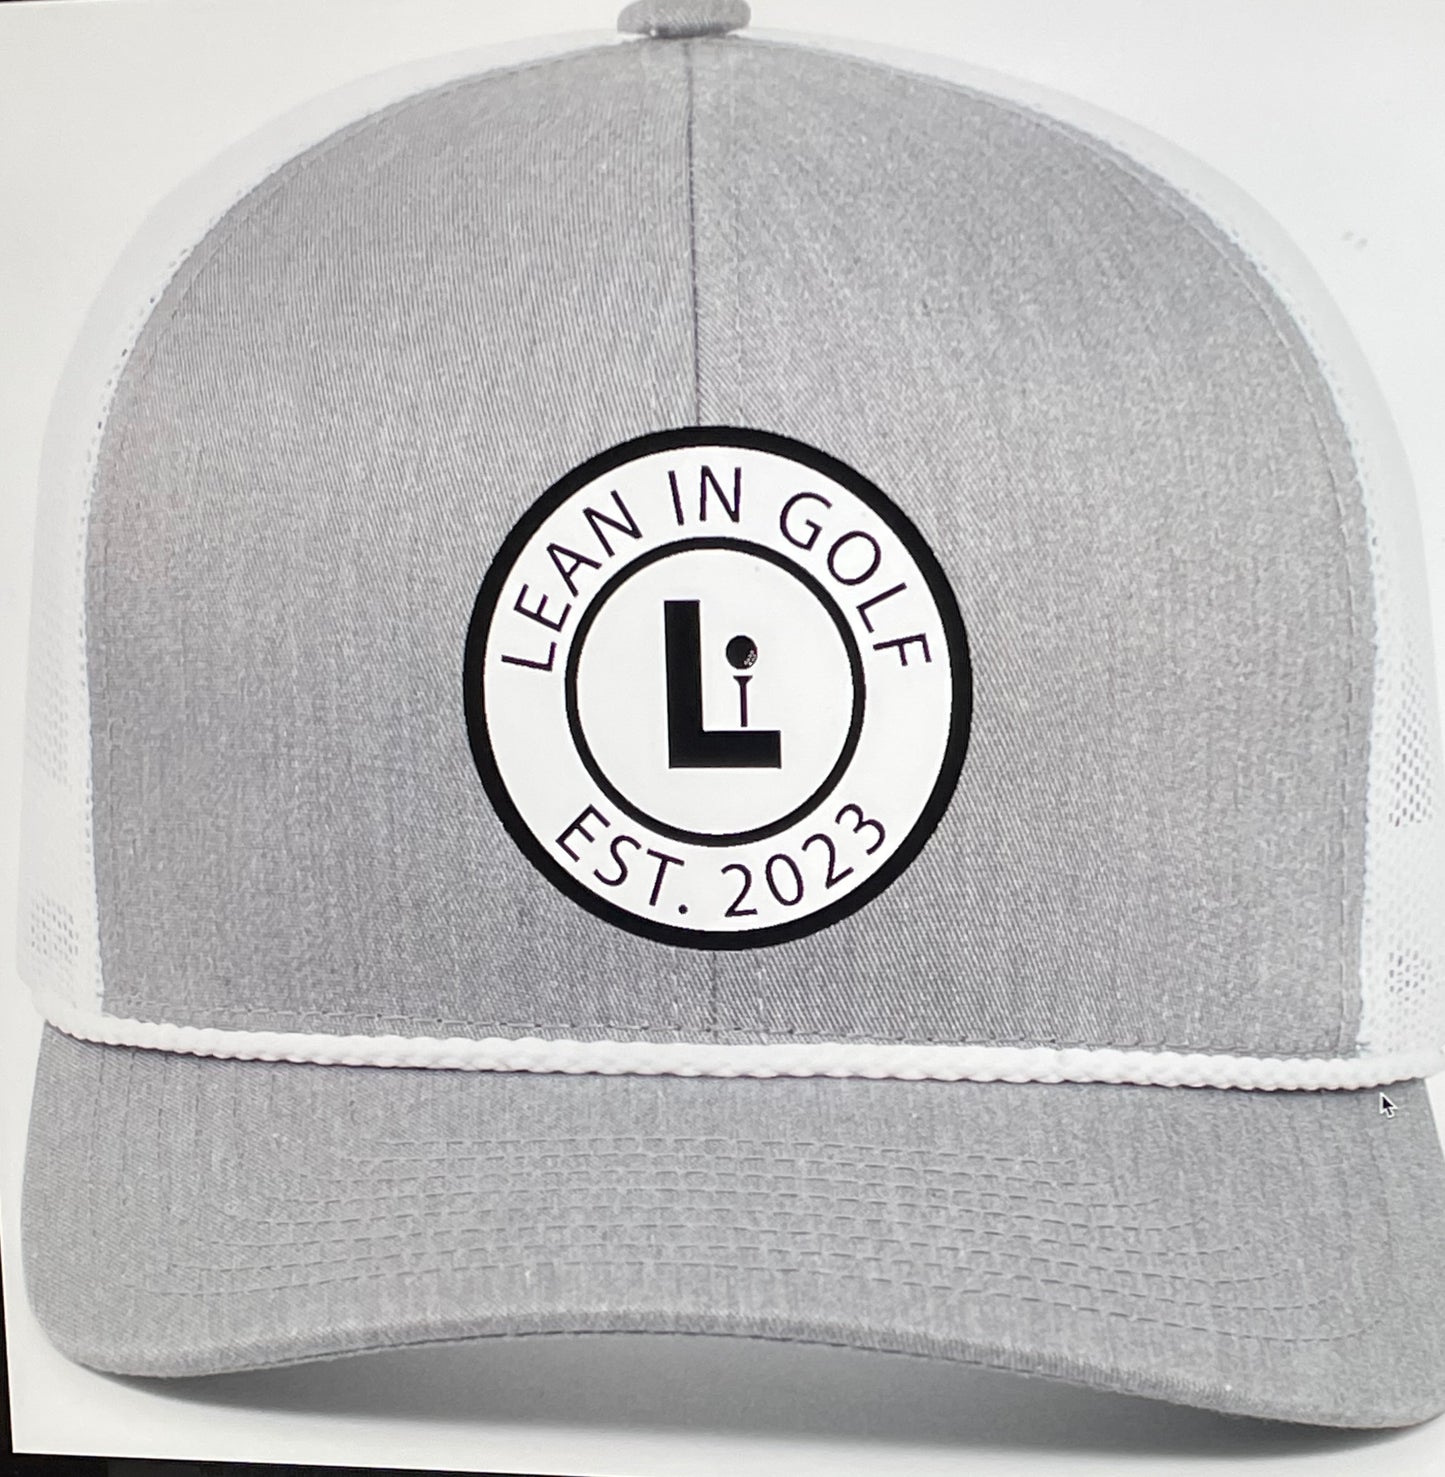 Lean In Grey/White Rope Trucker Hat with Black/White Circle